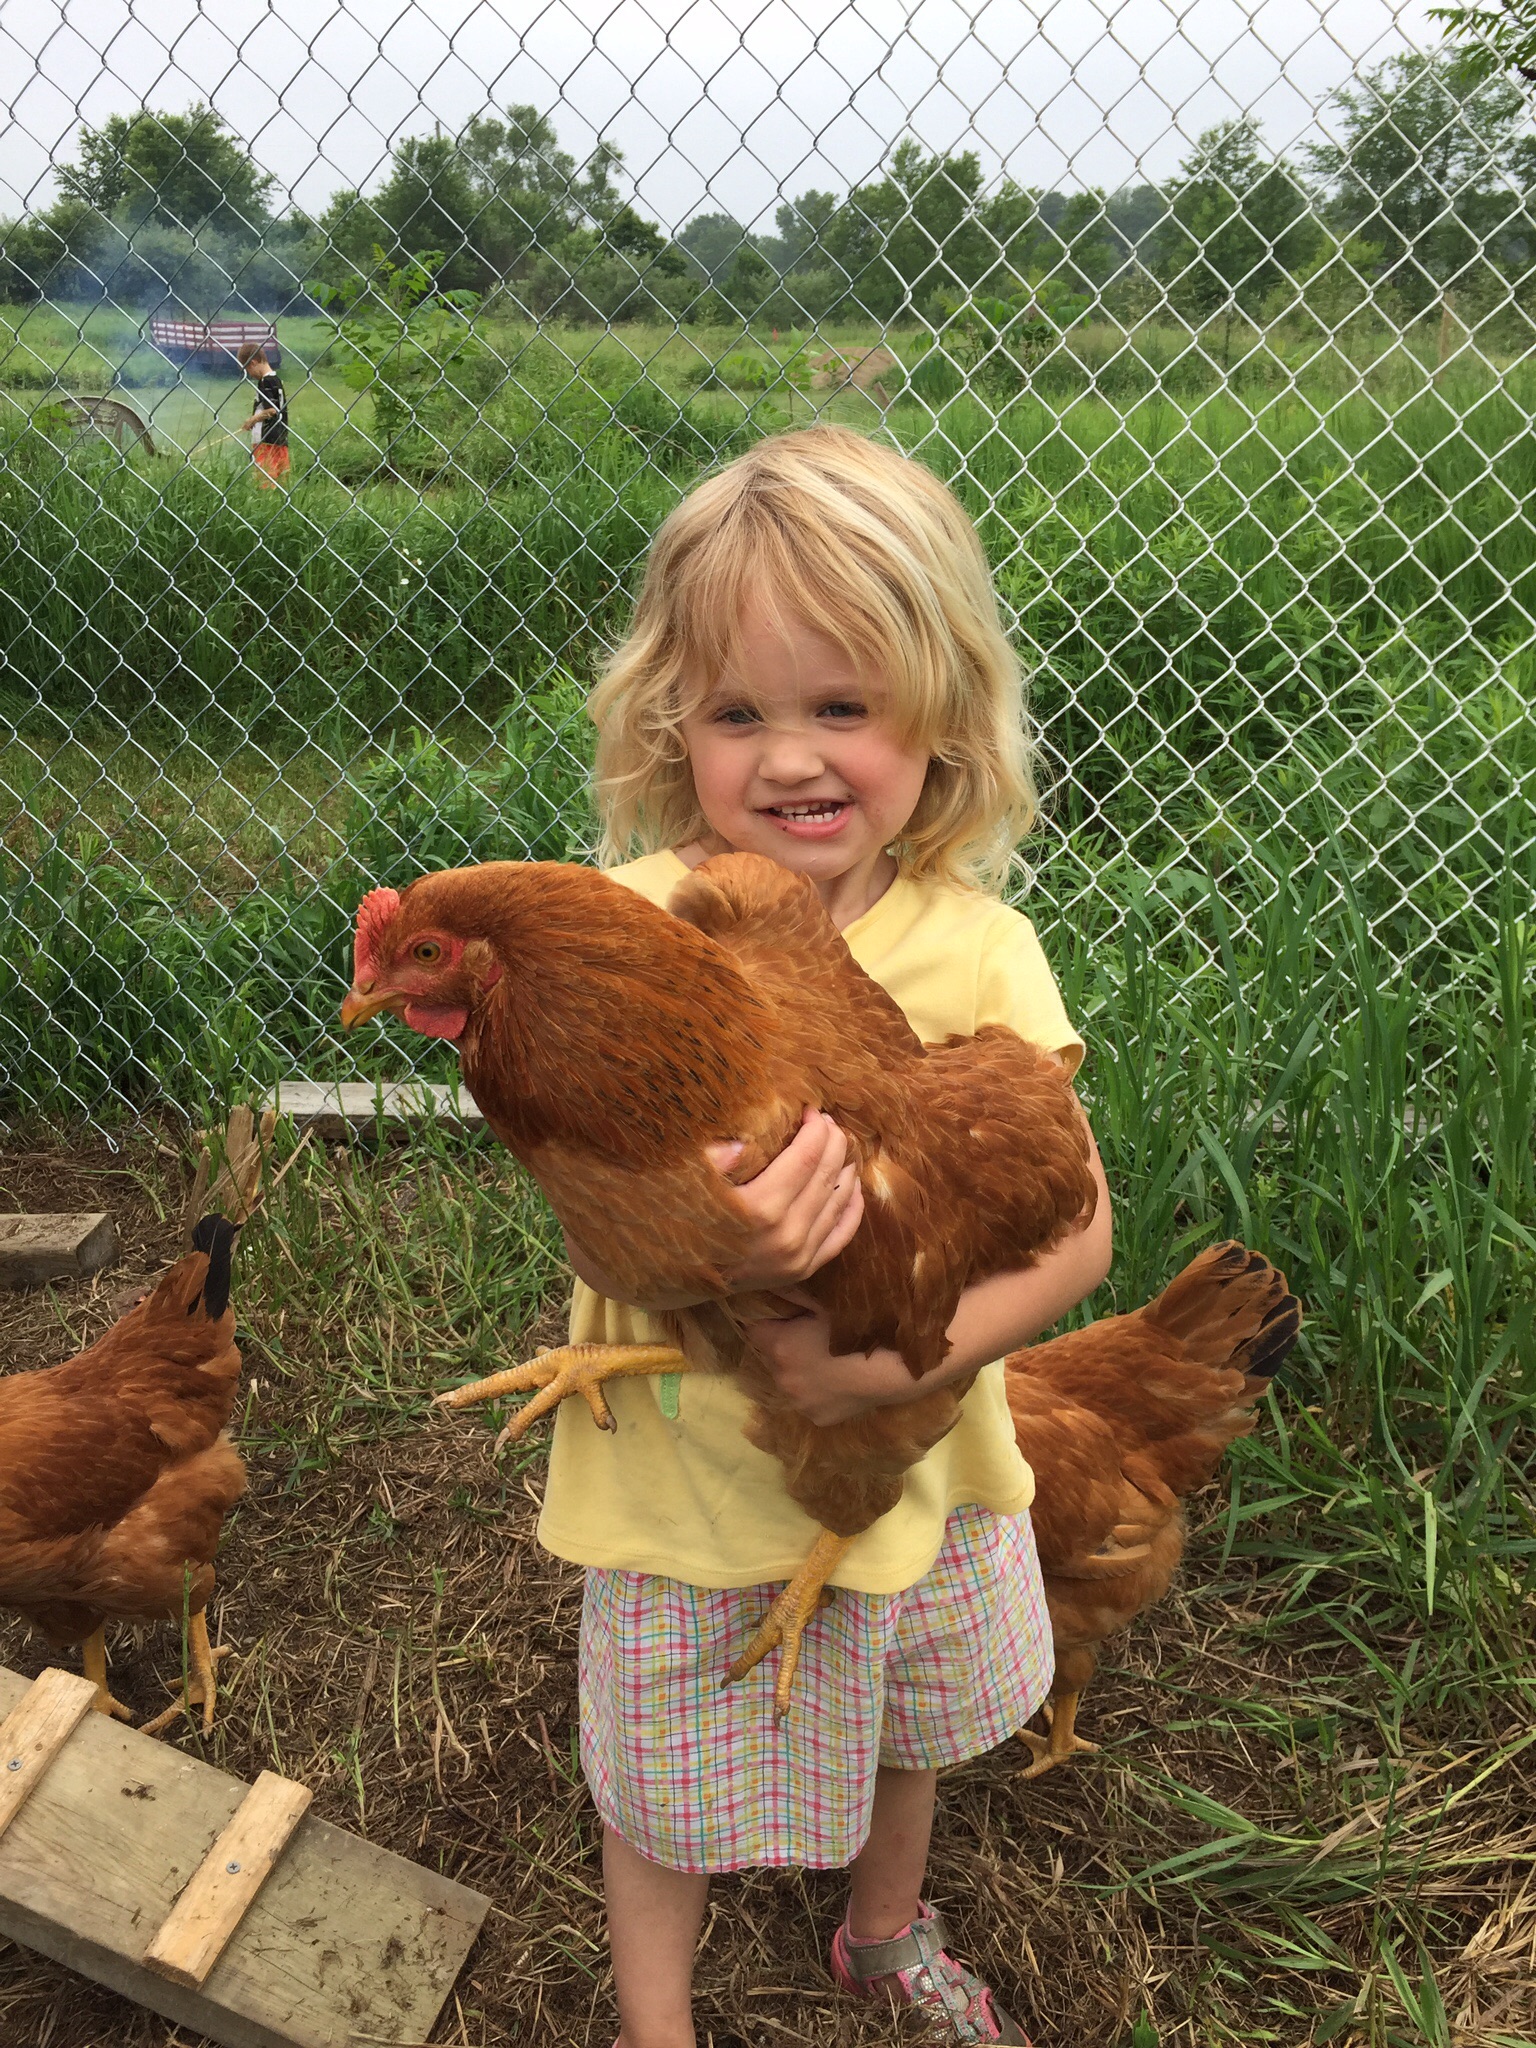 Our little girl loves to pick up the chickens and hug them. They don't seem to mind.